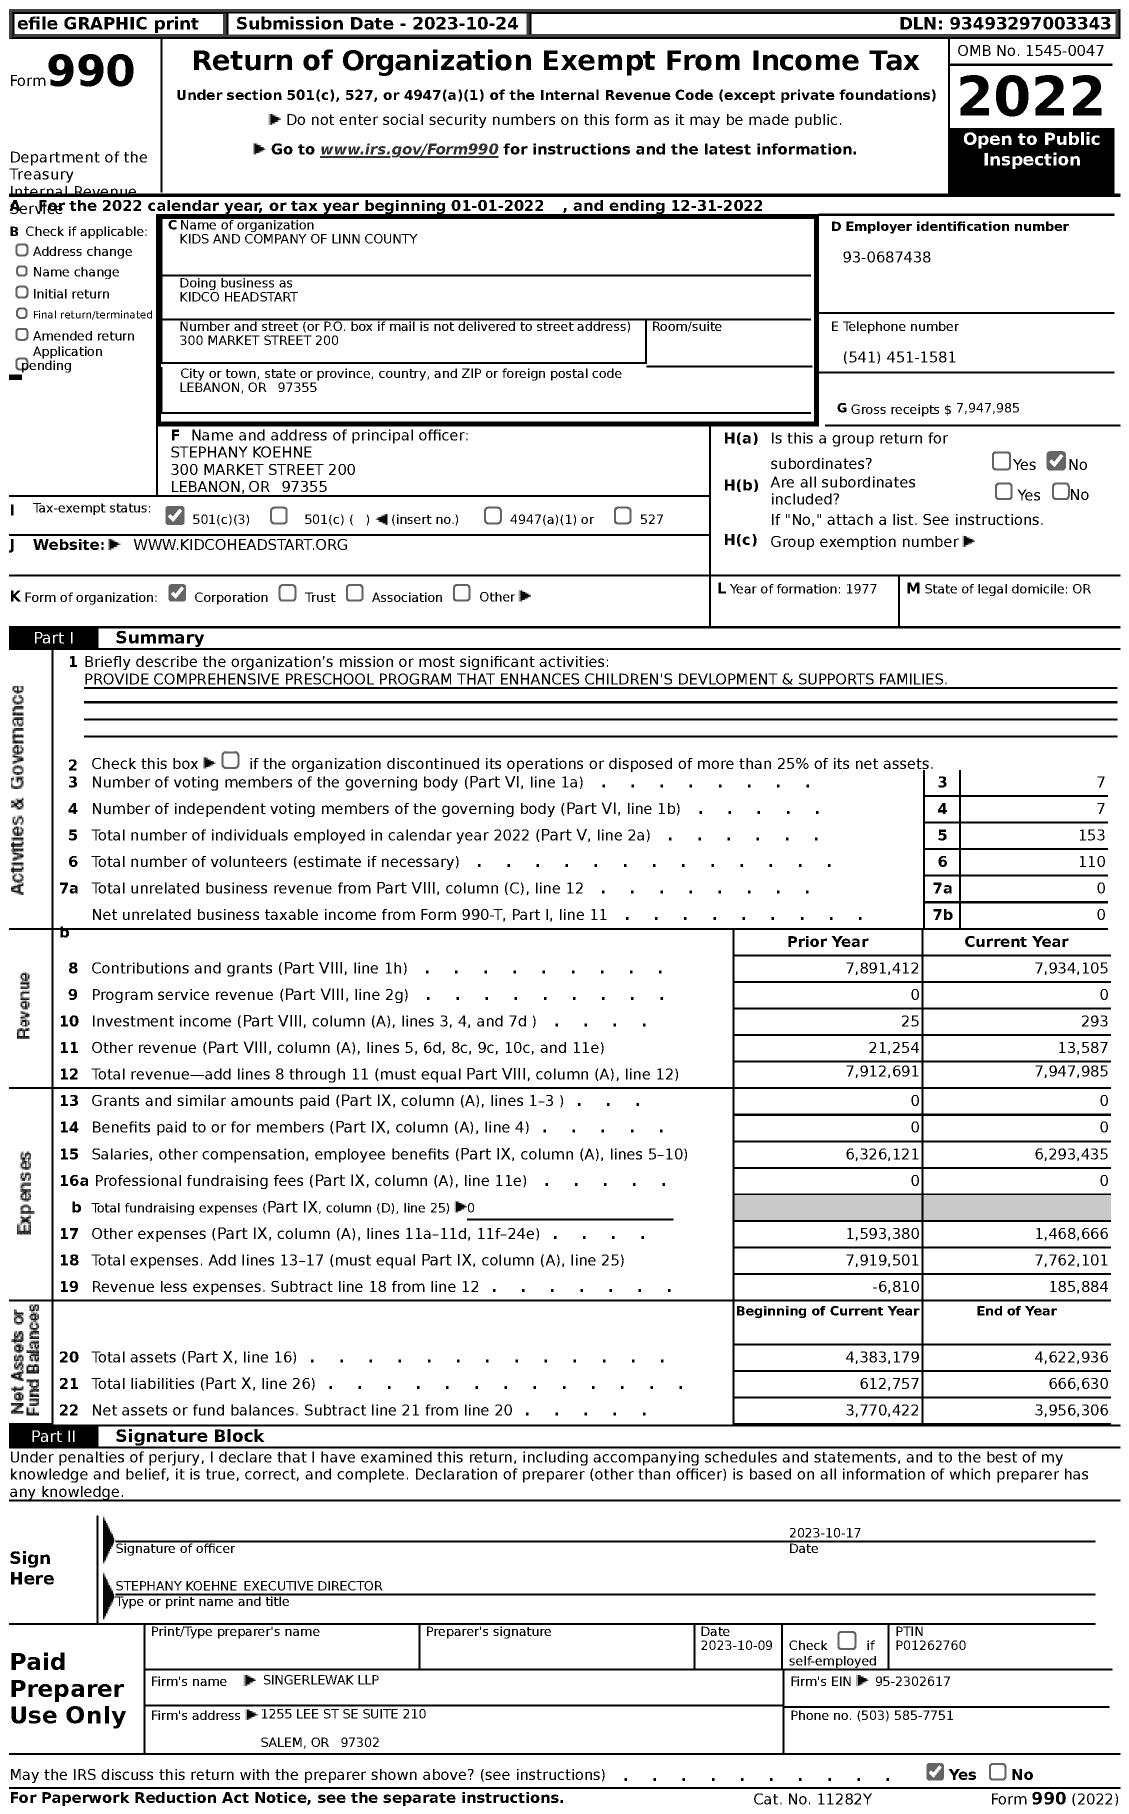 Image of first page of 2022 Form 990 for Kidco Headstart